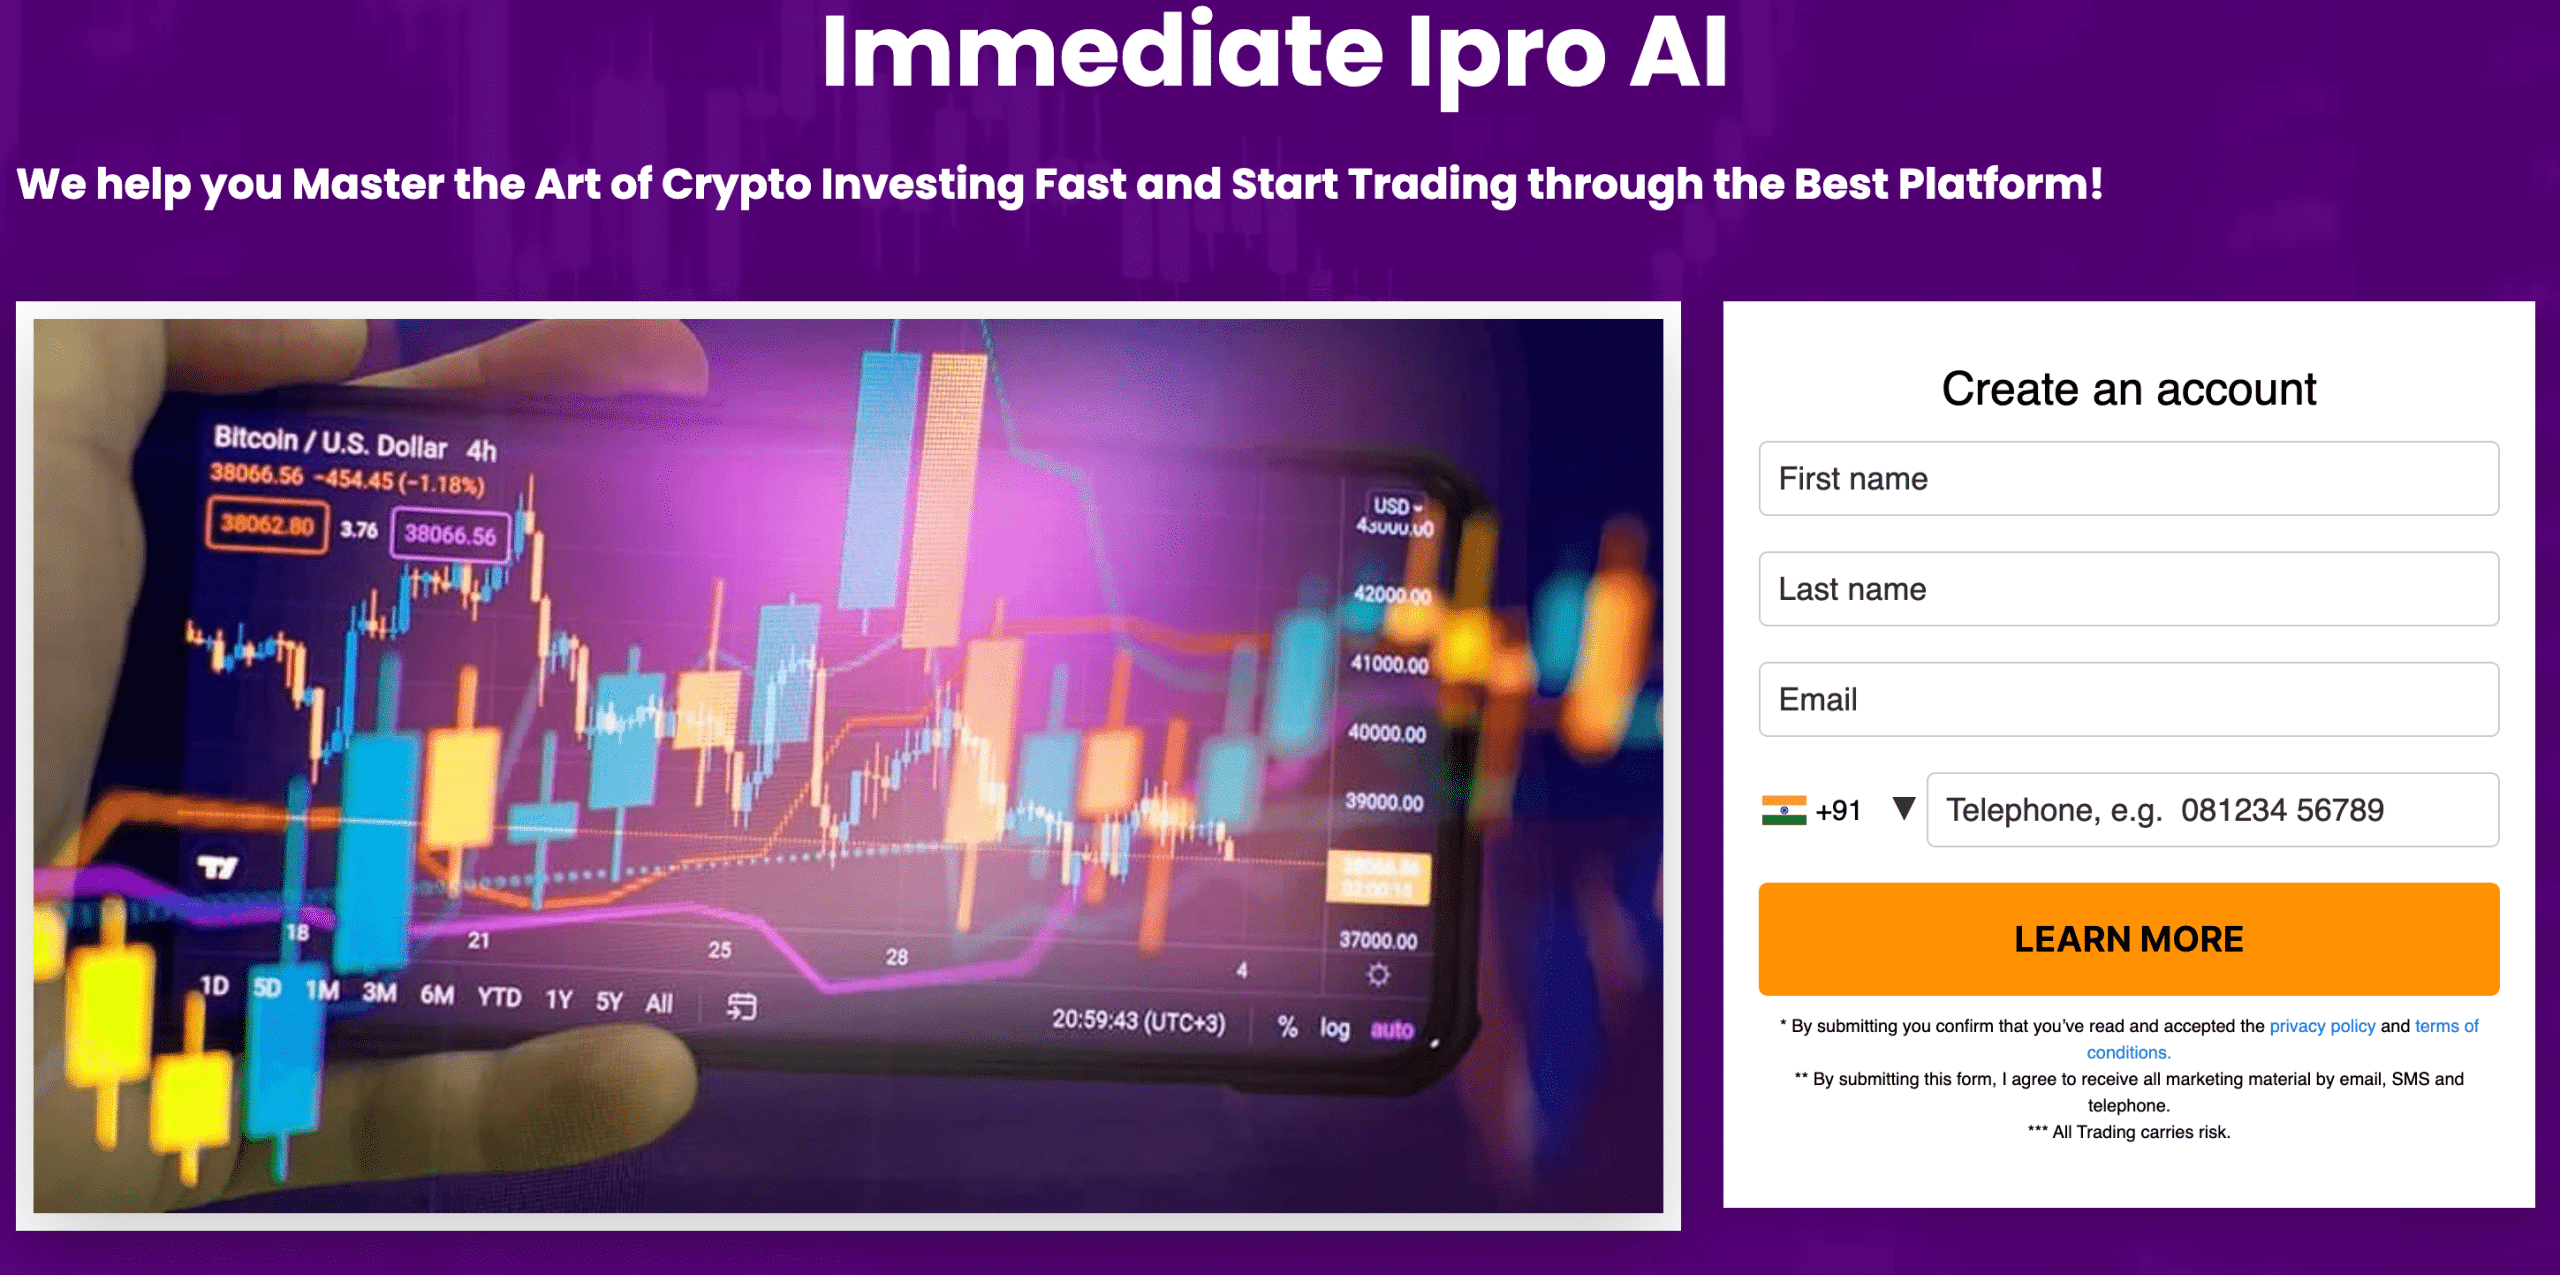 Immediate Ipro AI Review